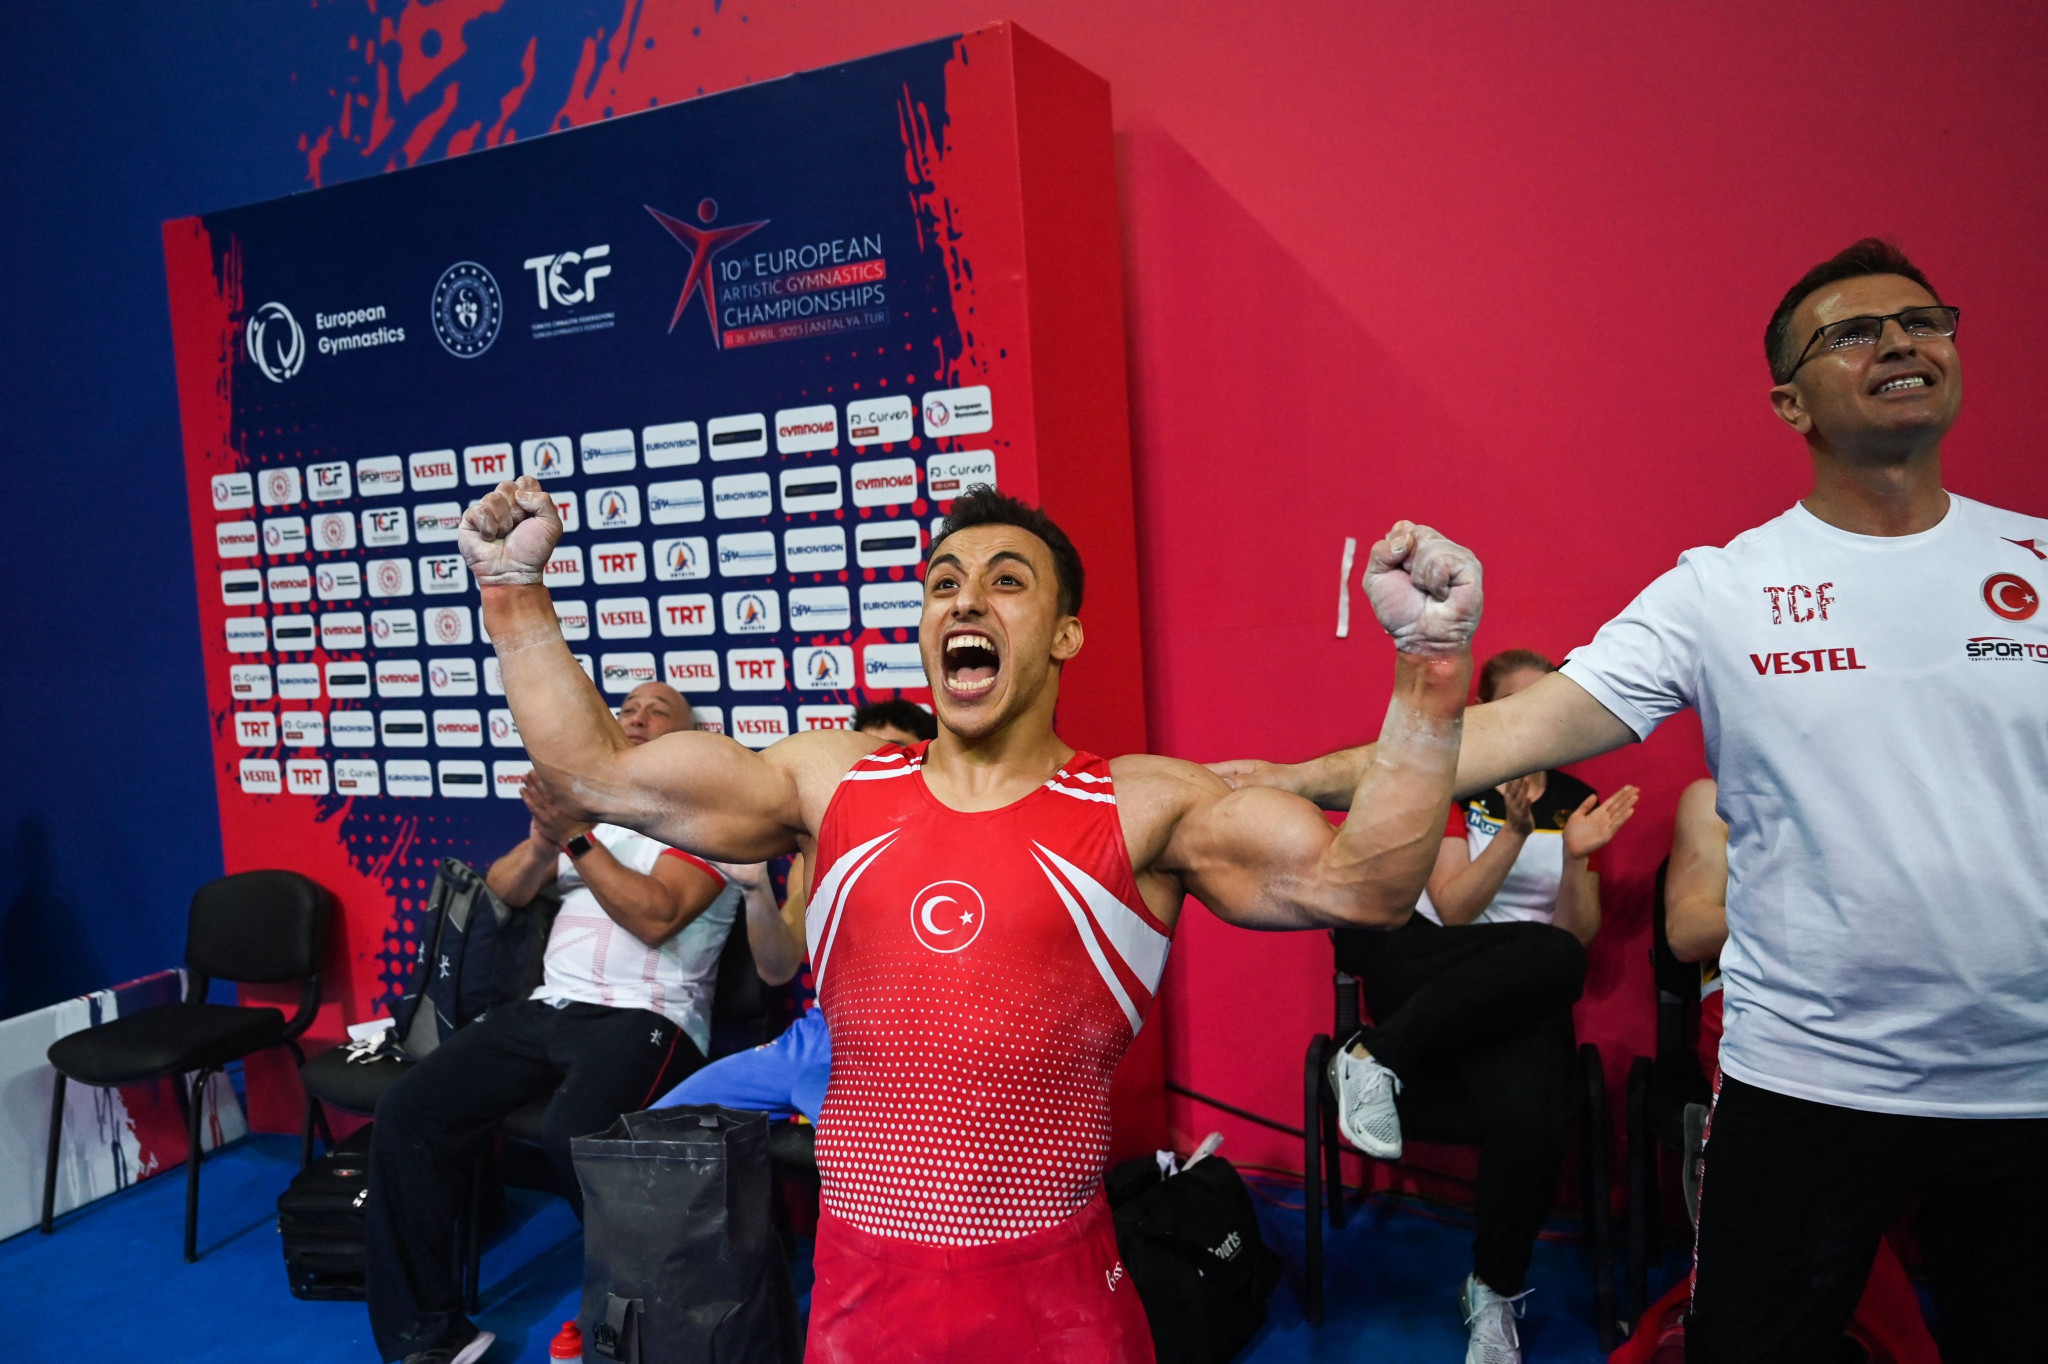 Turkey's Adem Asil celebrates after winning the men's all-around title at the European Artistic Gymnastics Championships in Antalya ©Getty Images